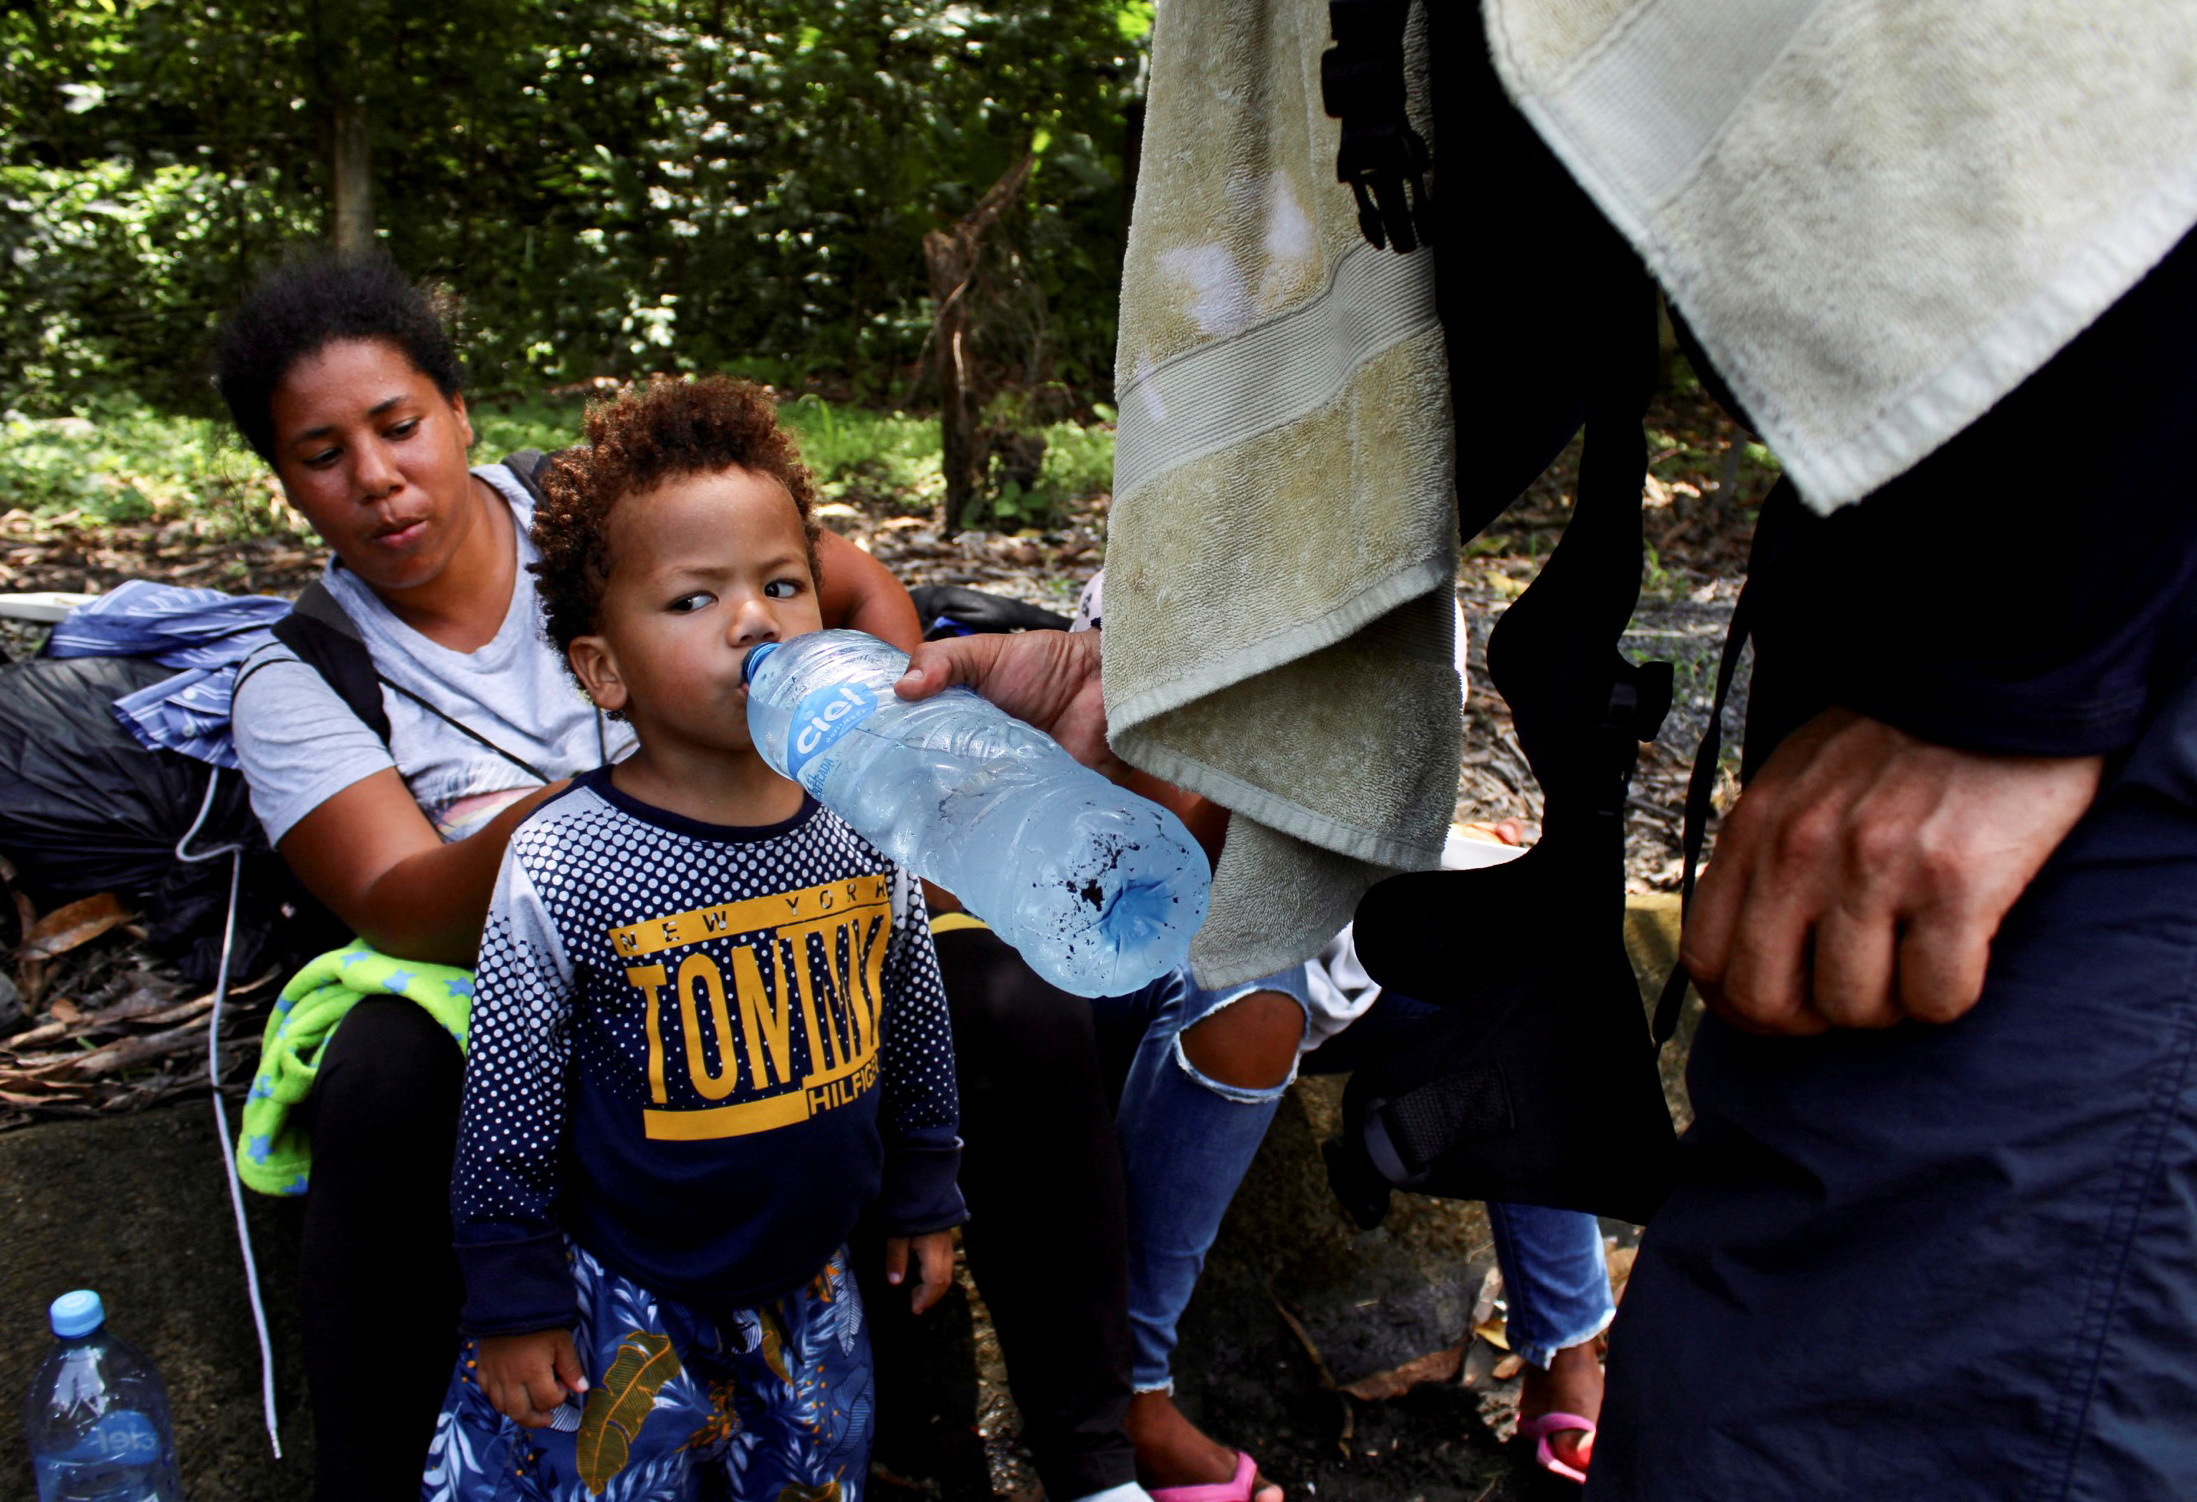 Migrants take part in a new U.S.-bound caravan in southern Mexico